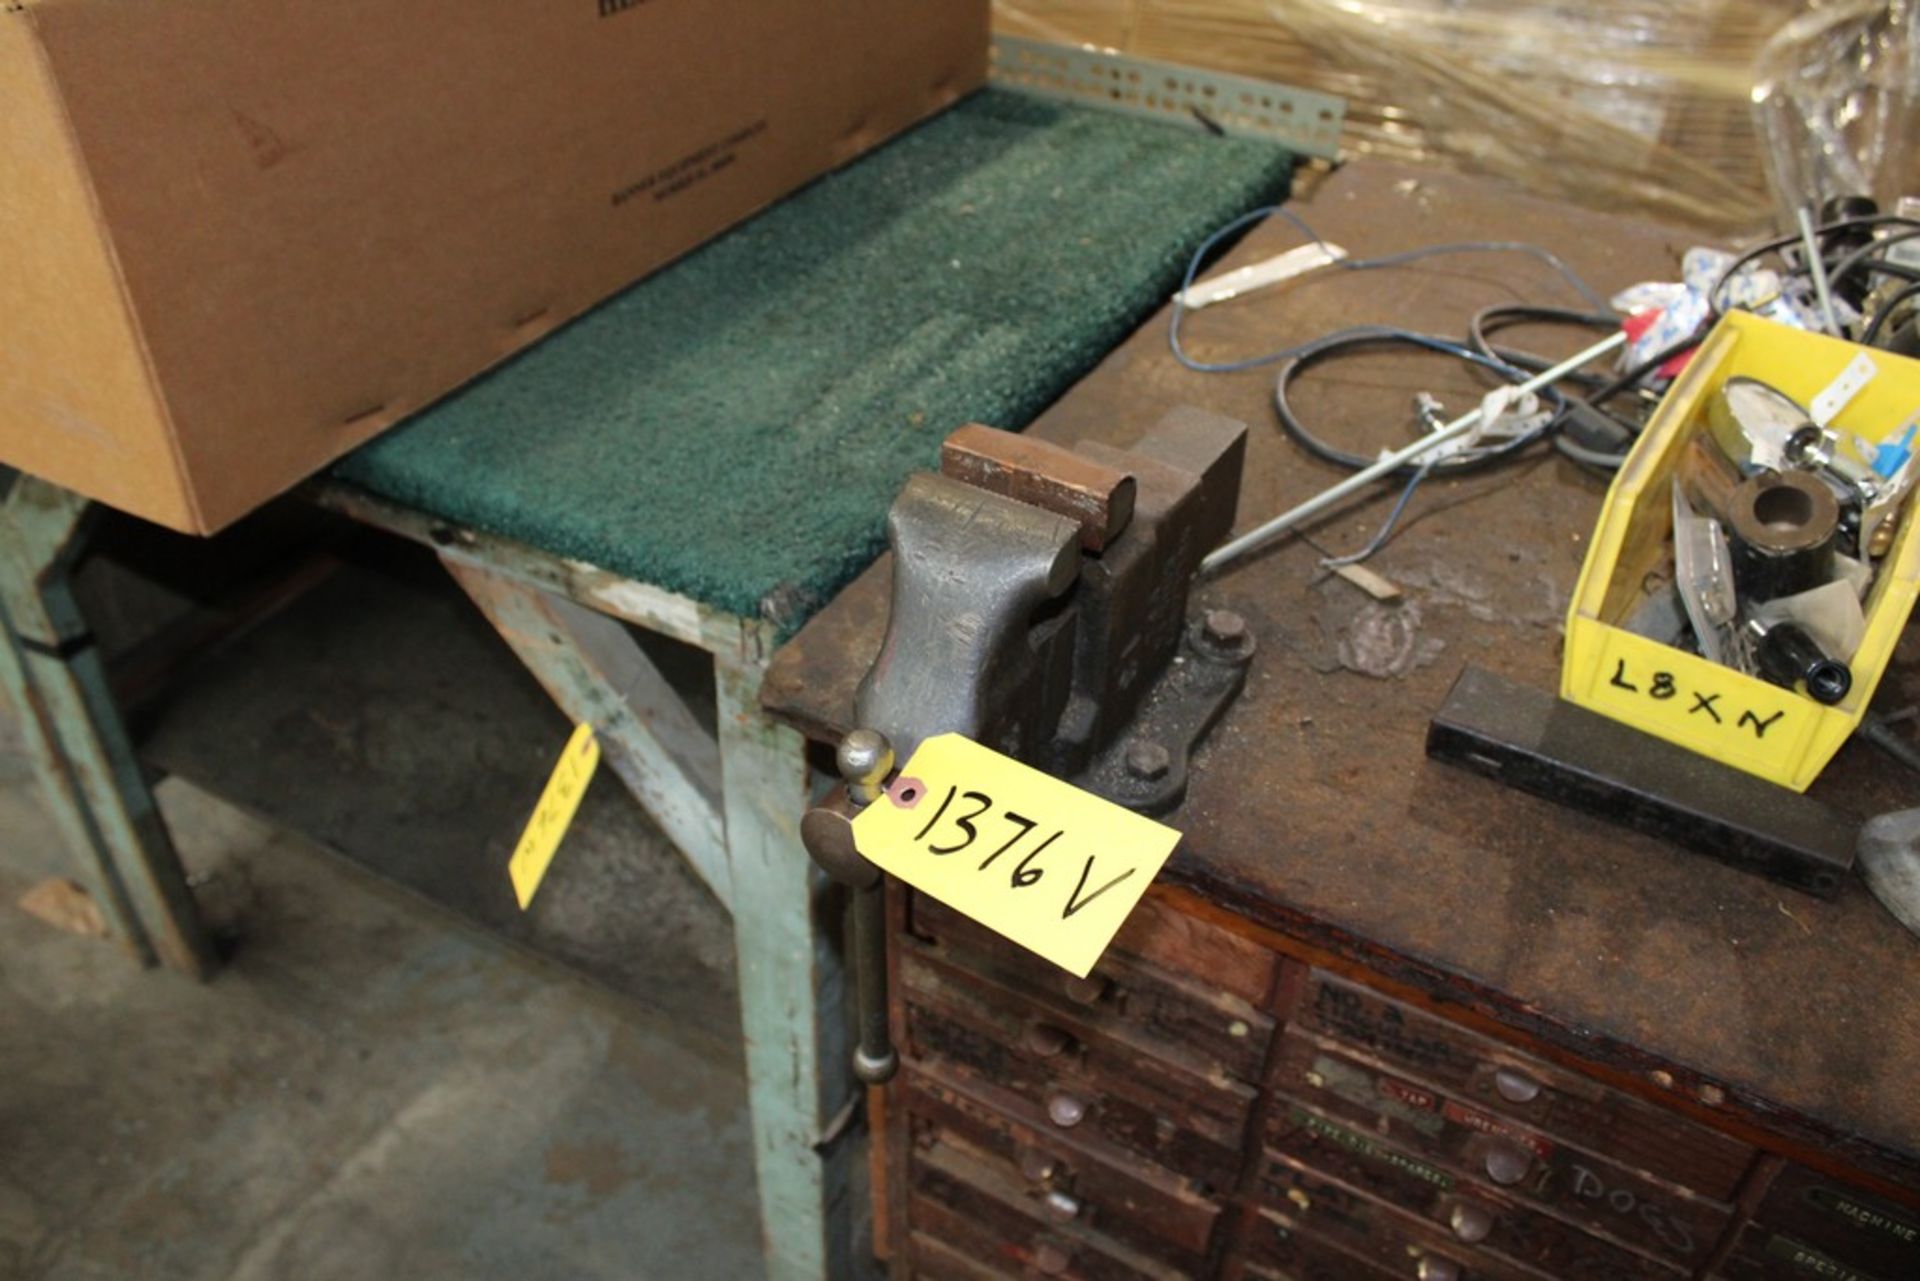 4" VISE, 3" VISE WITH WOOD WORK TABLE WITH DOUBLE SIDED DRAWERS BUILT IN, 48 DRAWER & 68 DRAWER - Image 2 of 3